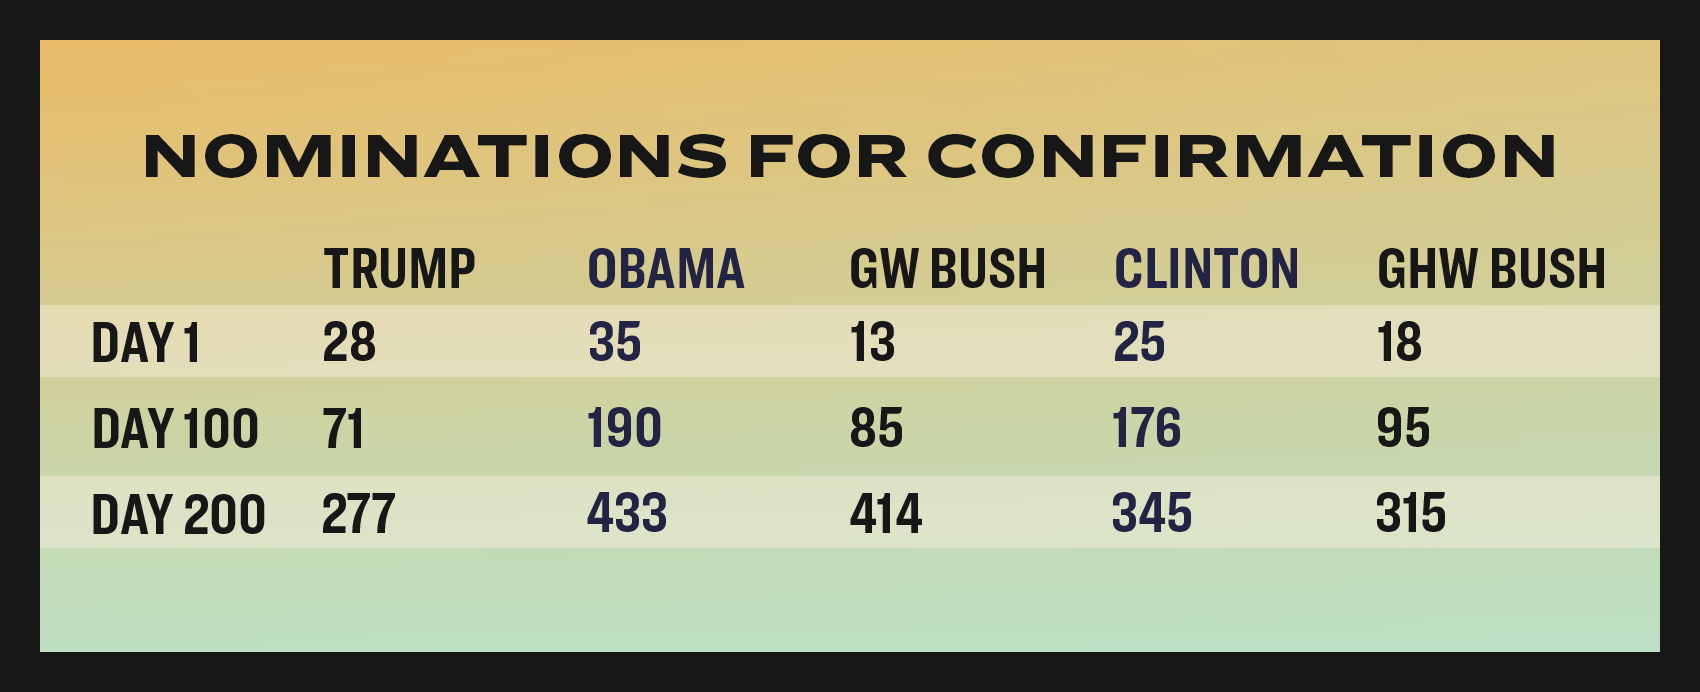 how many nominations for confirmation Trump, Obama, GW Bush, Clinton, and GHW Bush on their 1st, 100th, and 200th day in office.